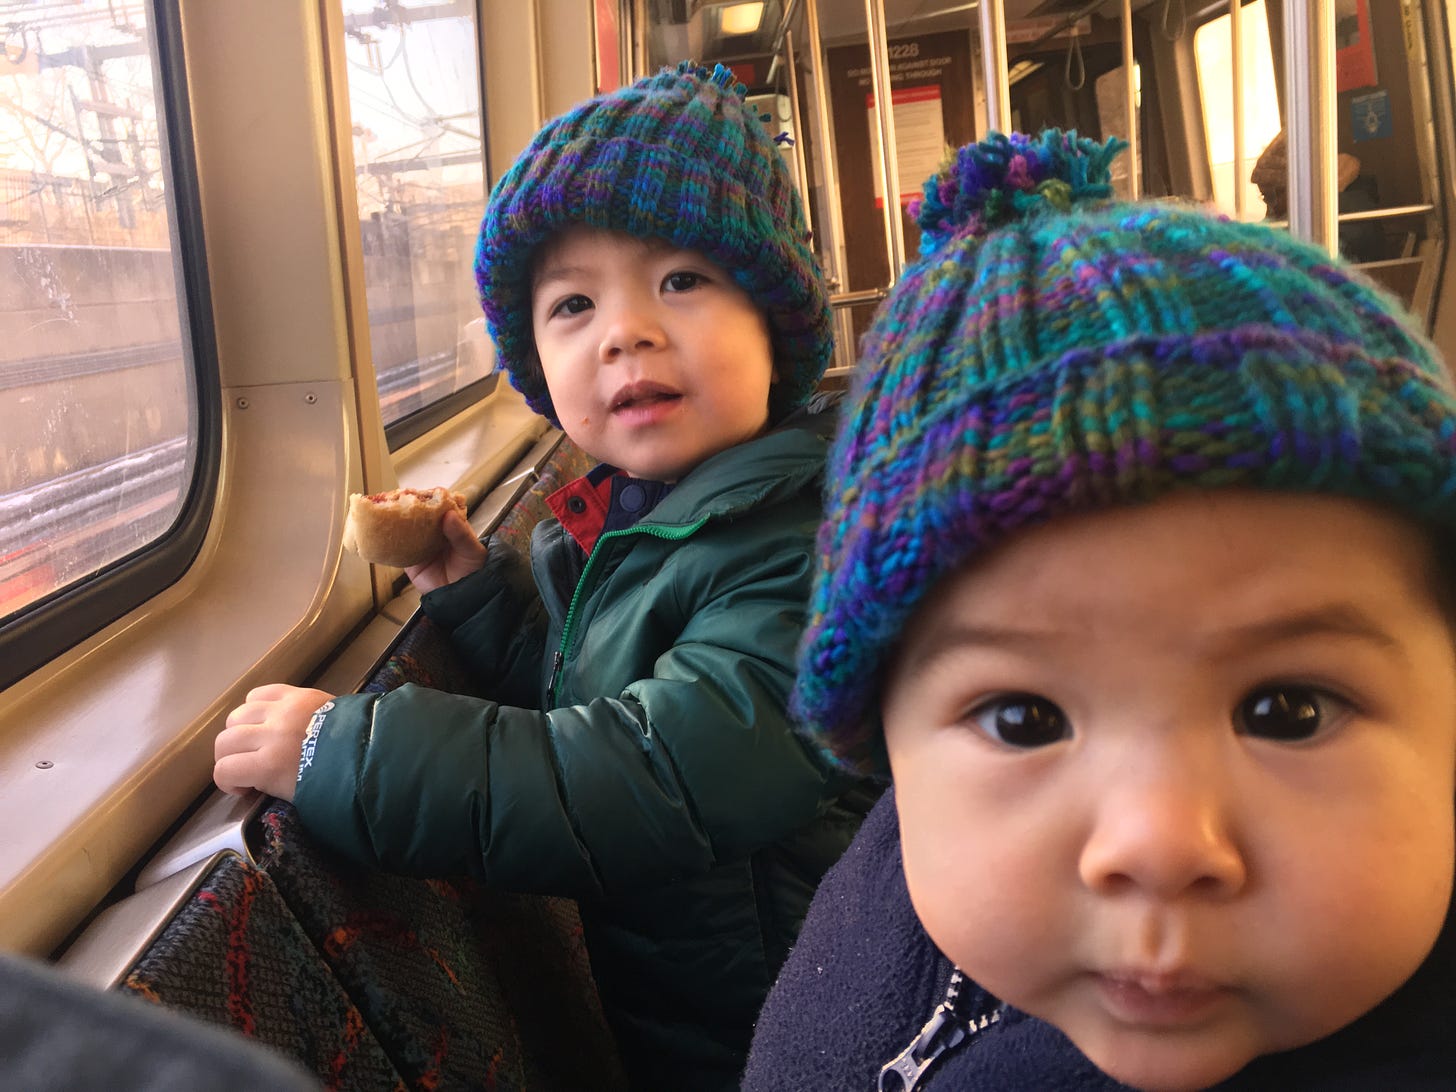 Baby Cass and toddler Blaise smile for a picture wearing knitted winter hats on an Orange Line MBTA train